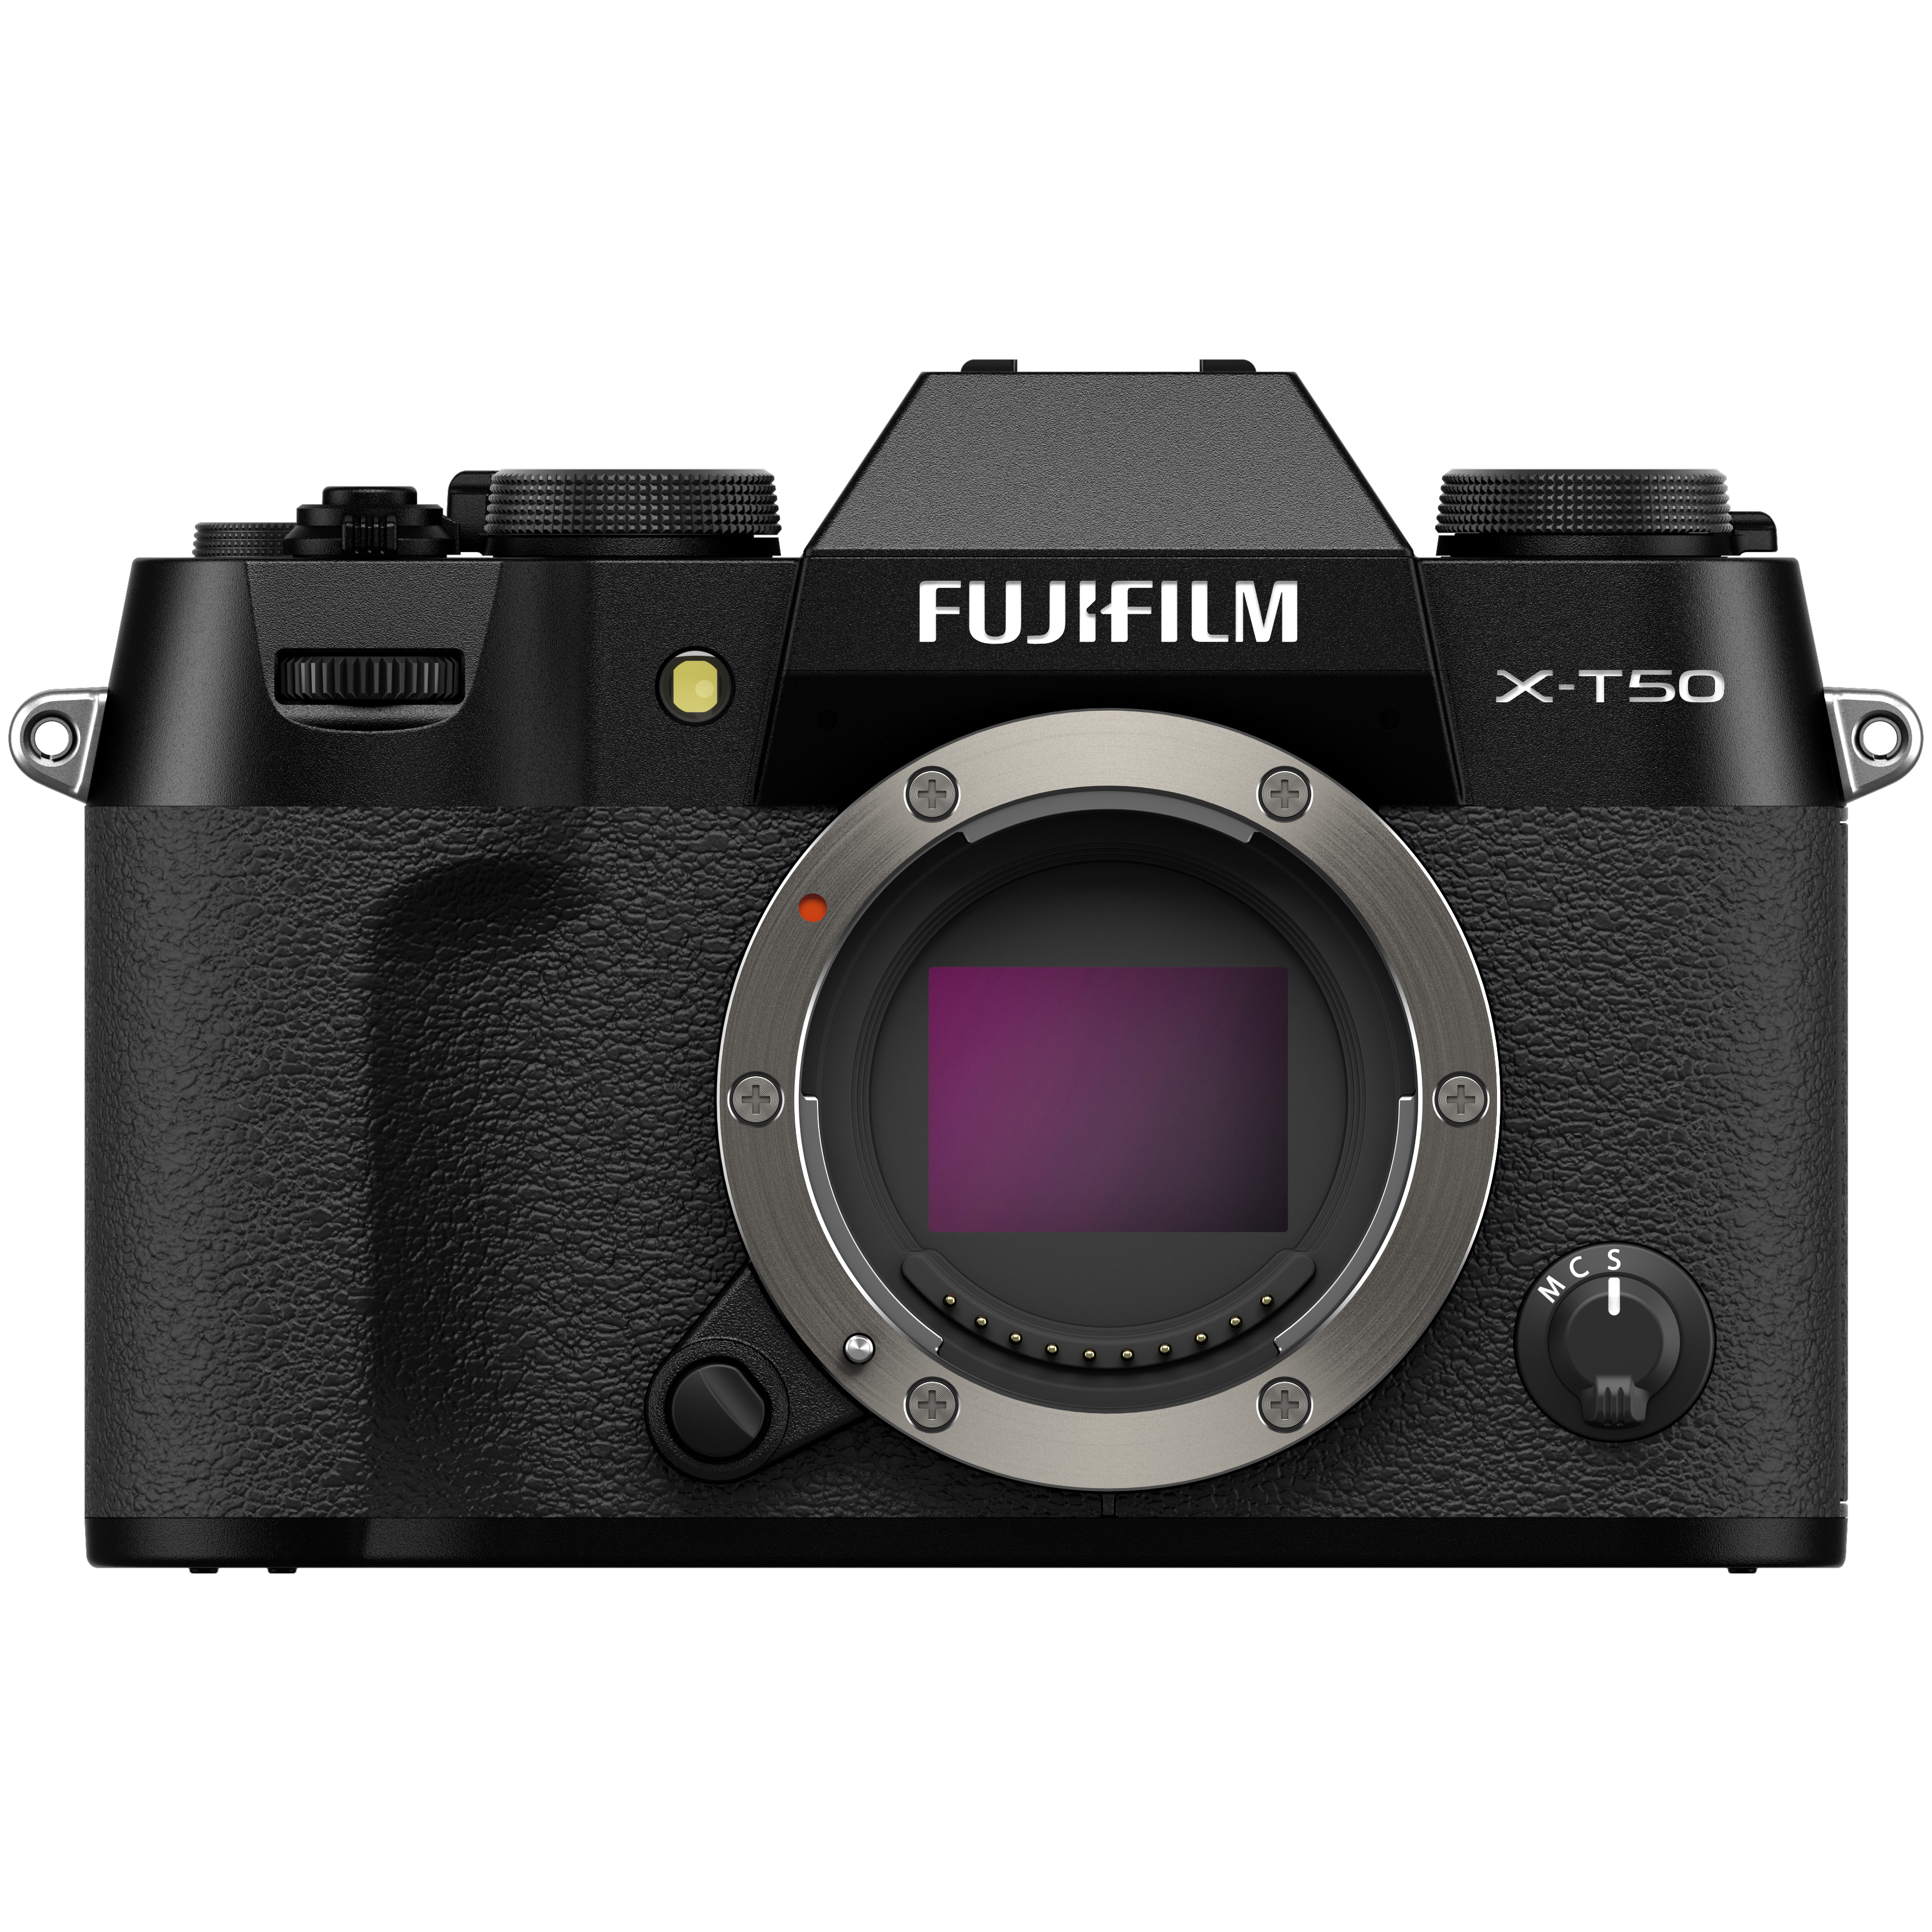 Introducing the Film Simulation Dial on the Fujifilm X-T50